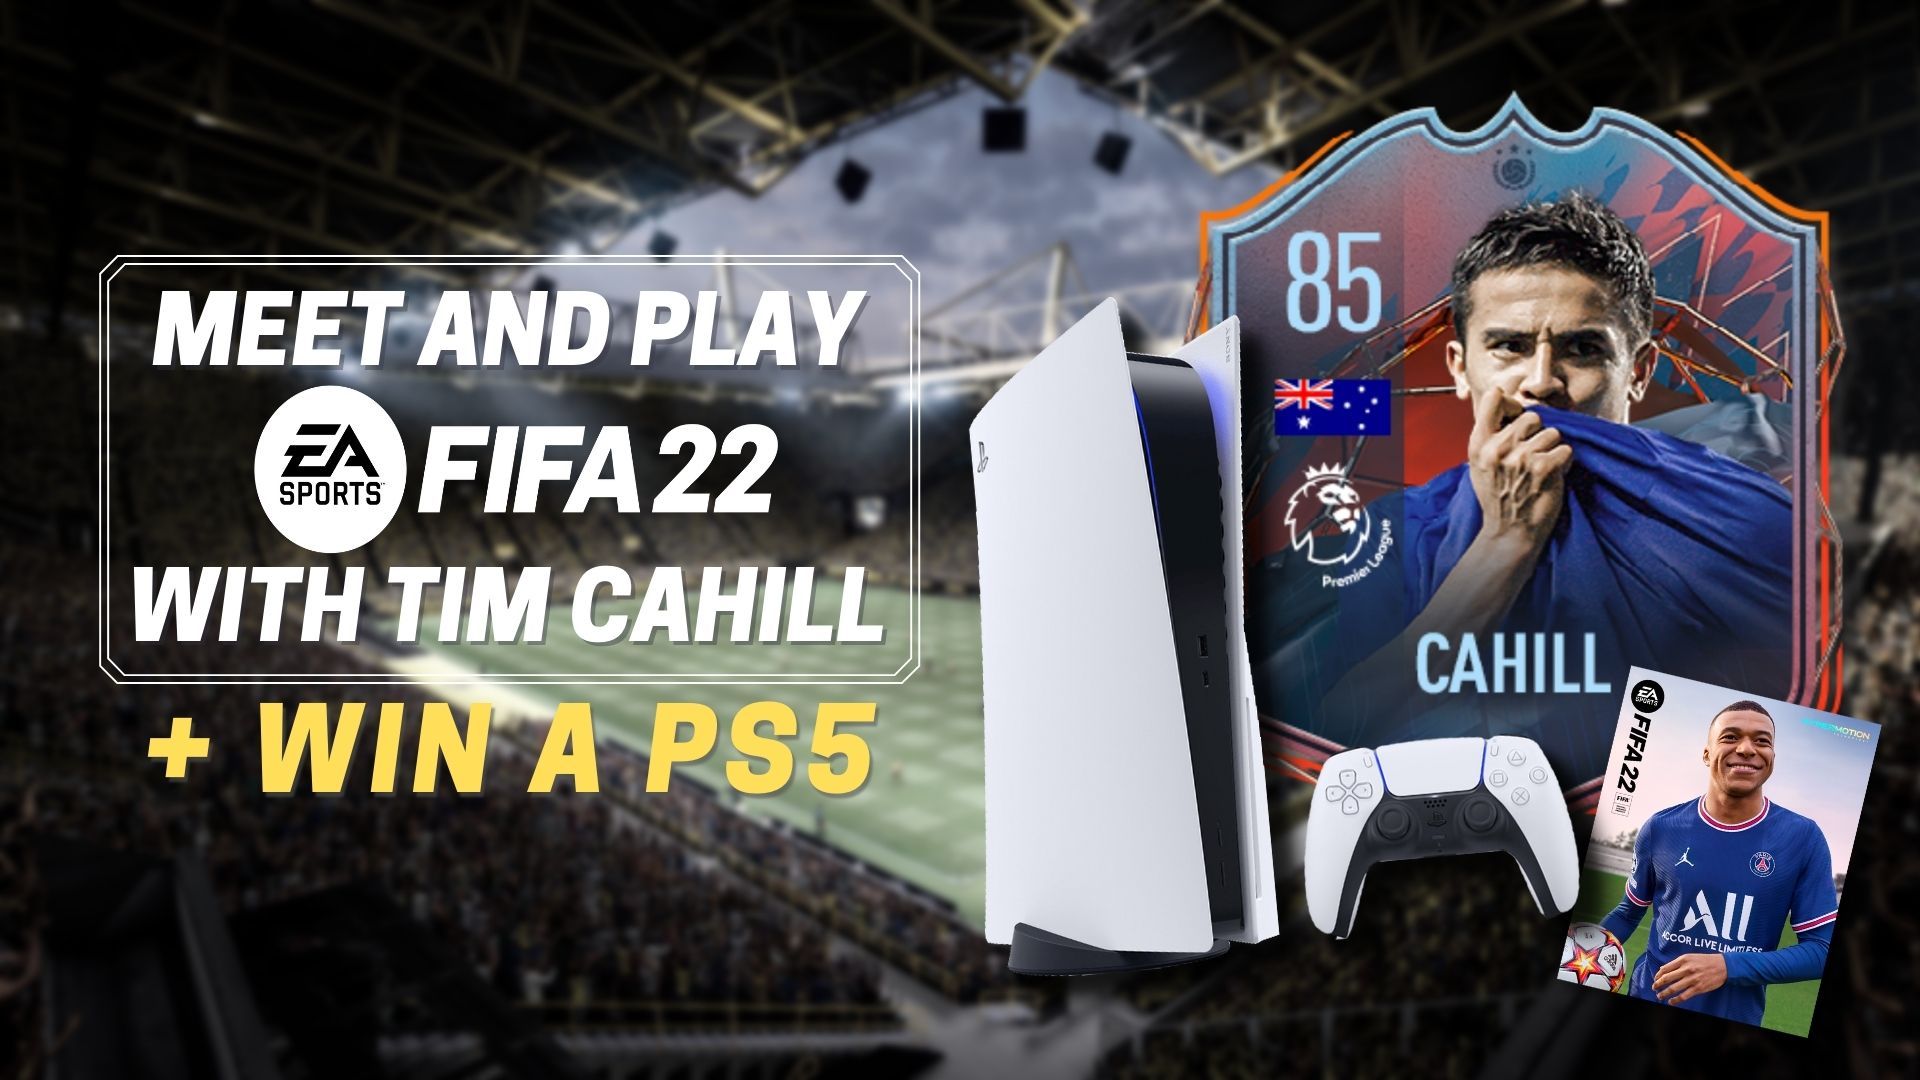 Win a chance to play FIFA 22 with Tim Cahill.